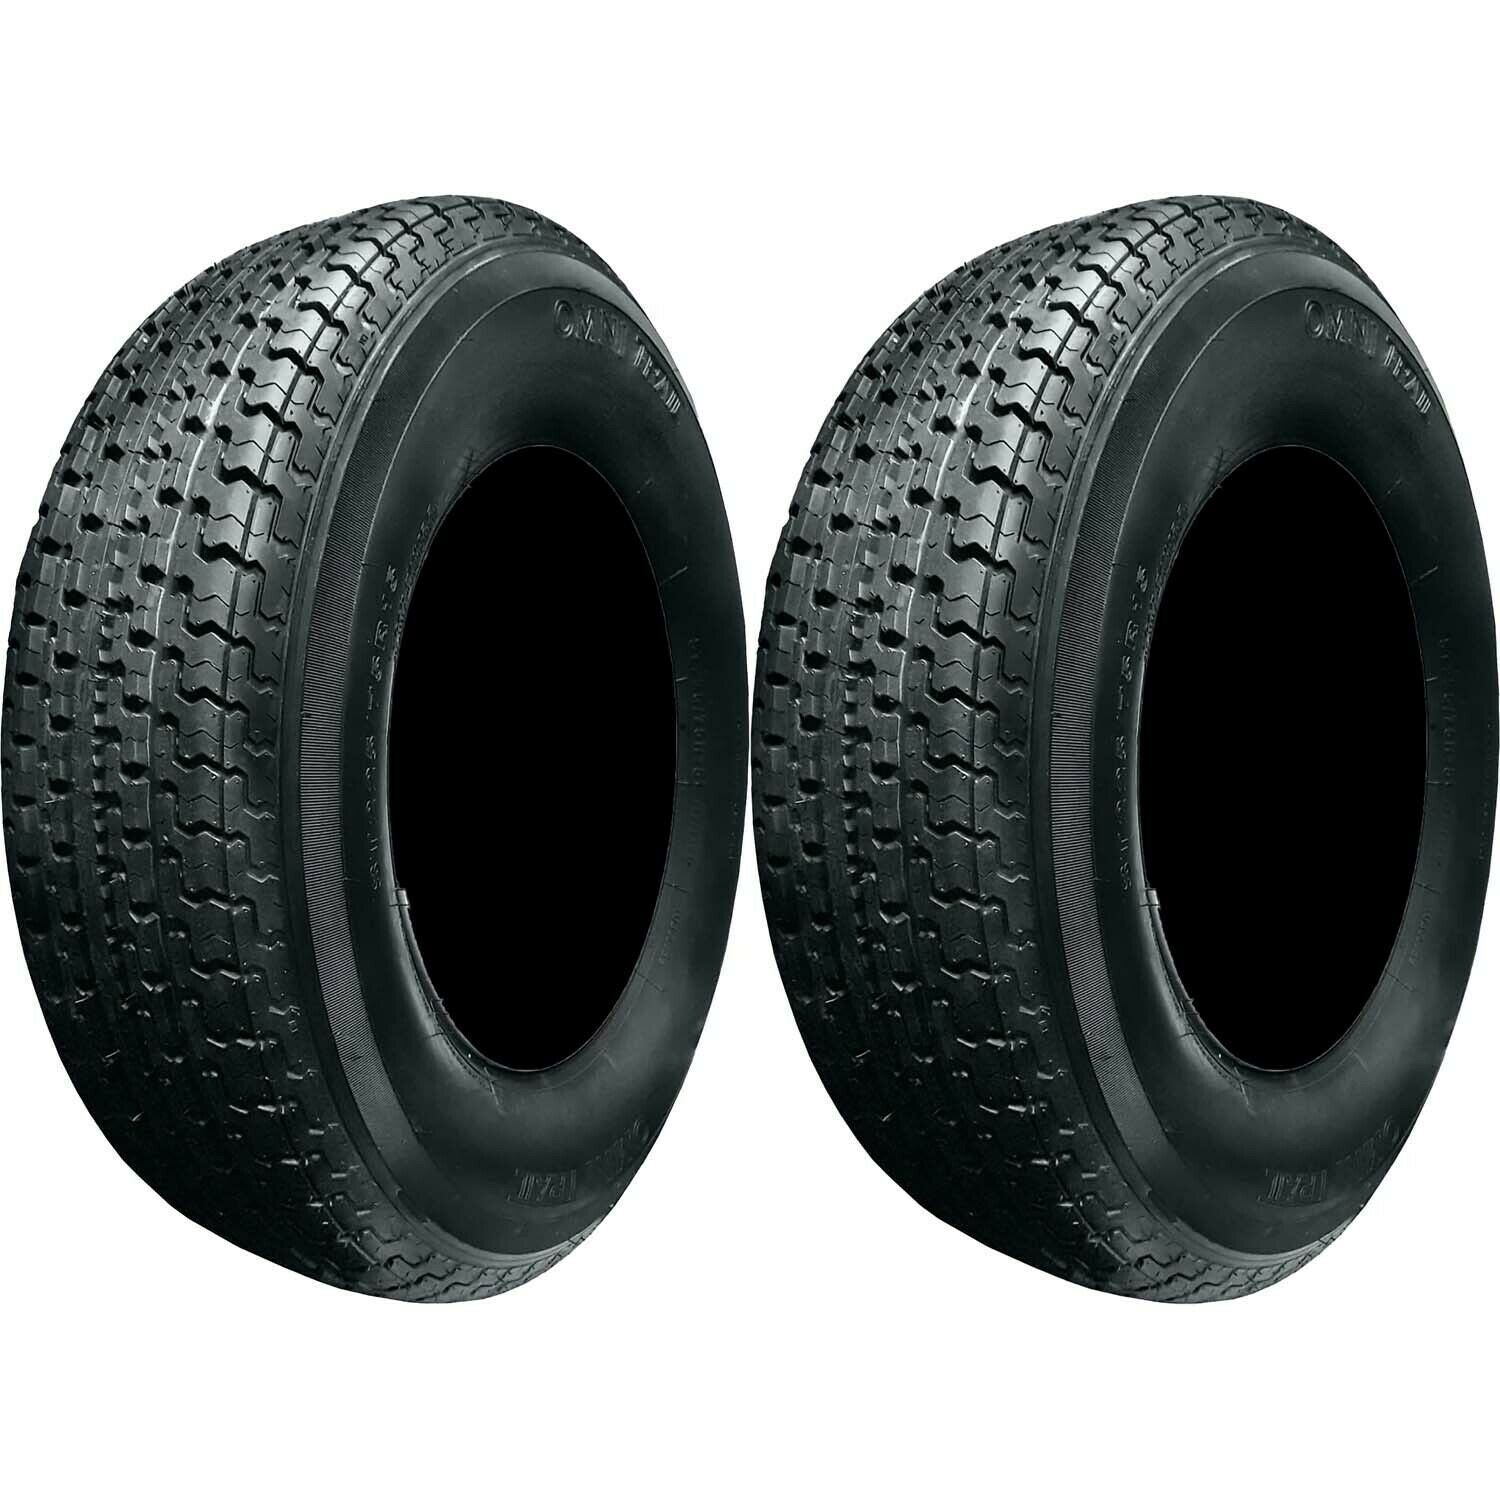 Omni Trail Radial Trailer Tire LRD 8ply ST205/75R15 - Pack of 2